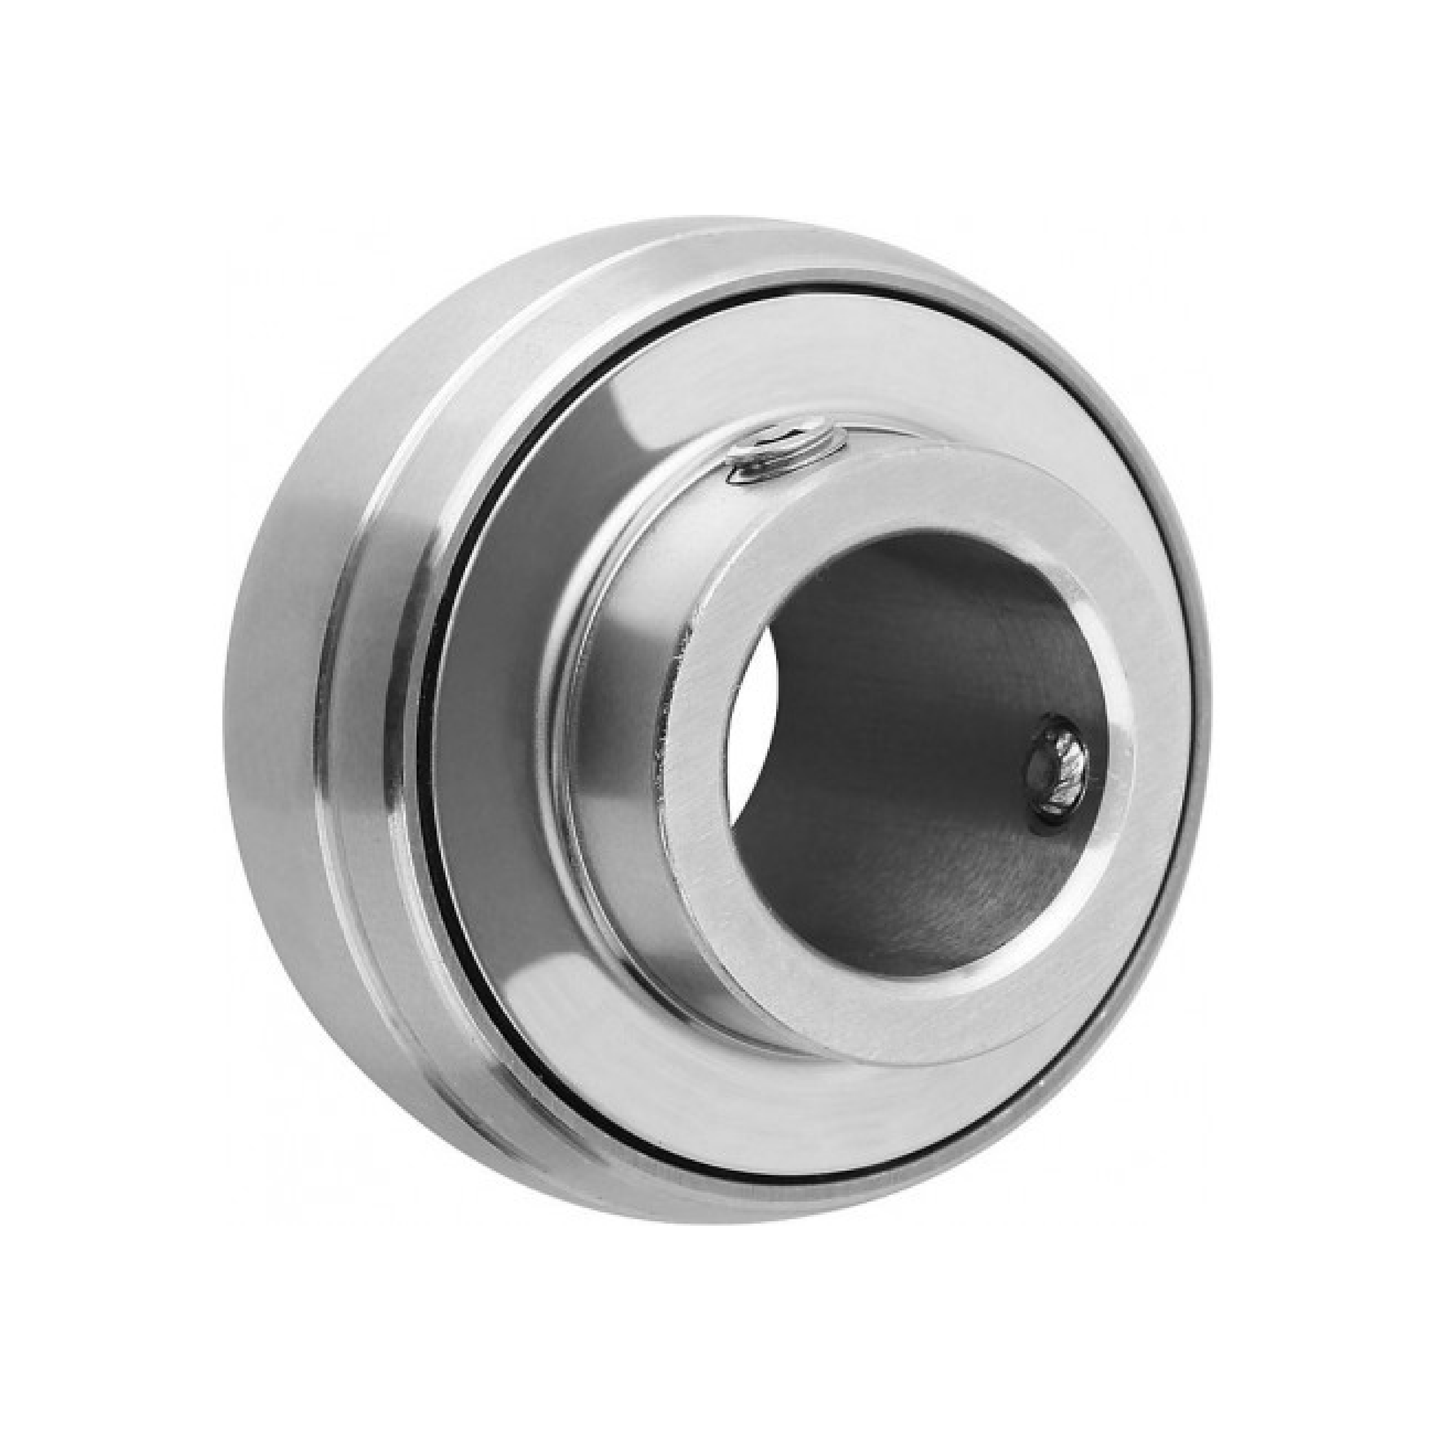 Bearing with 60x110x65.1 UC 212 stainless steel locking ring